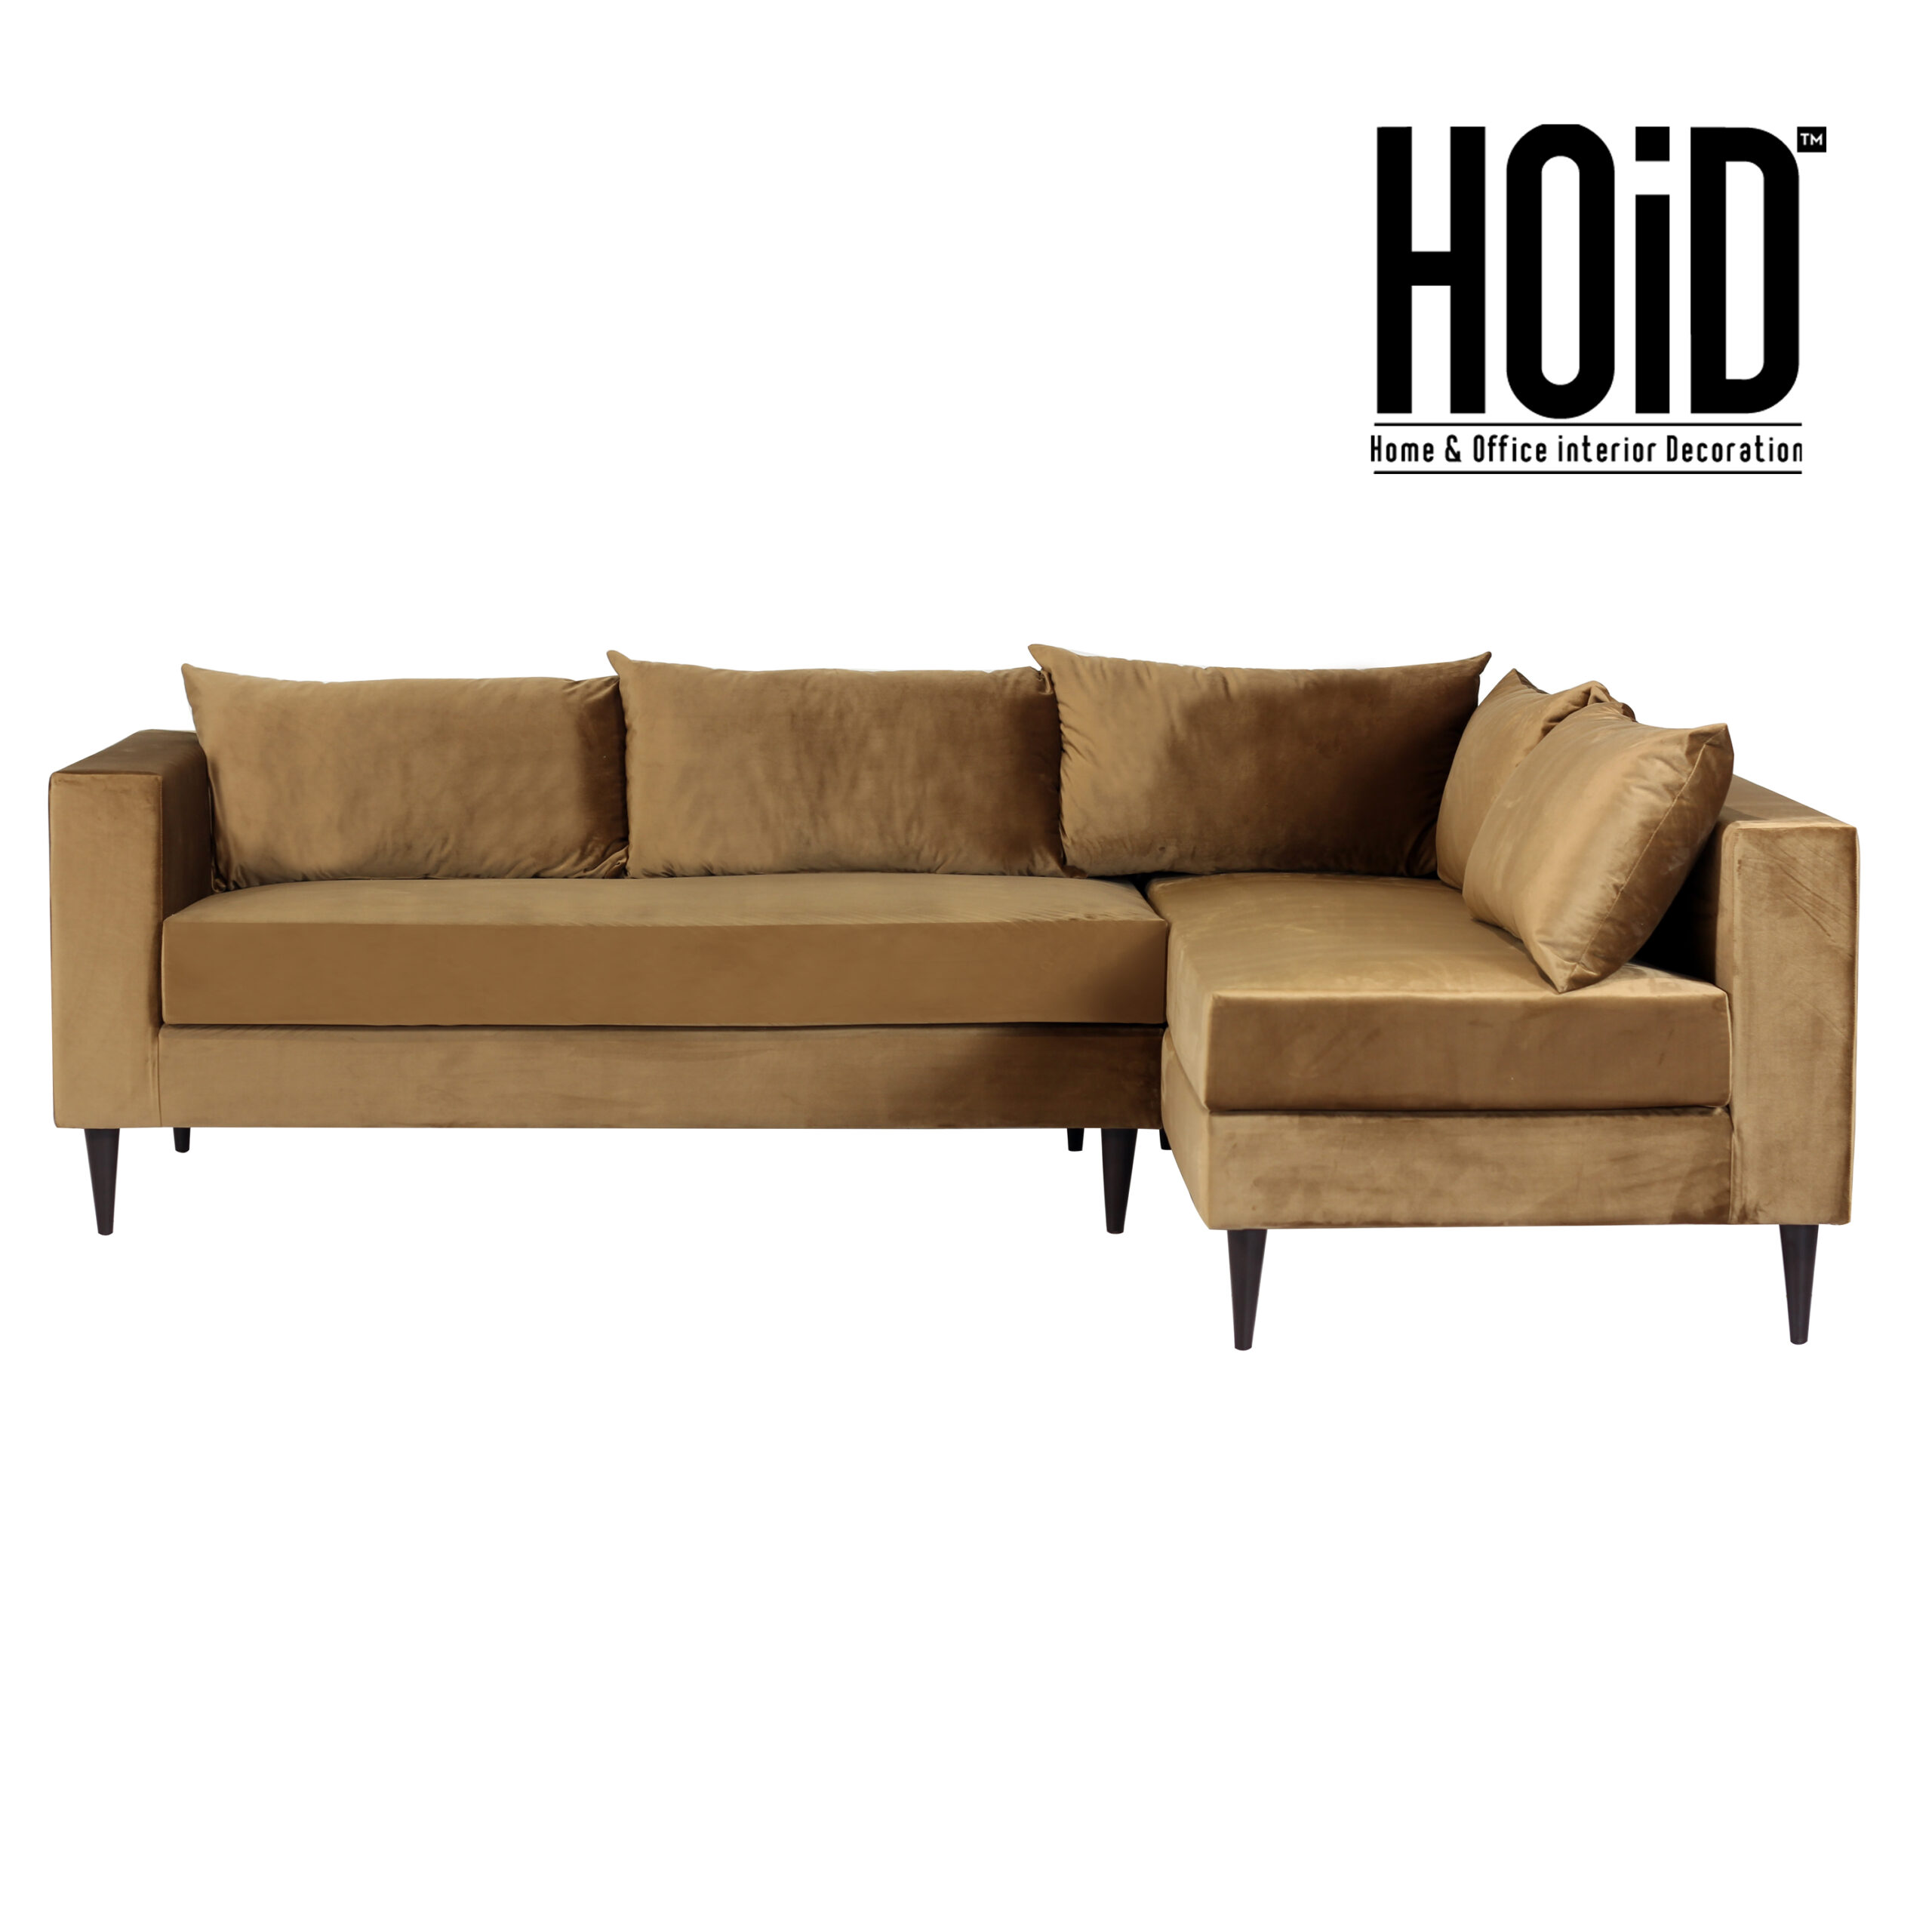 blink-5-seater-sofa-in-suede-scaled-2.jpg